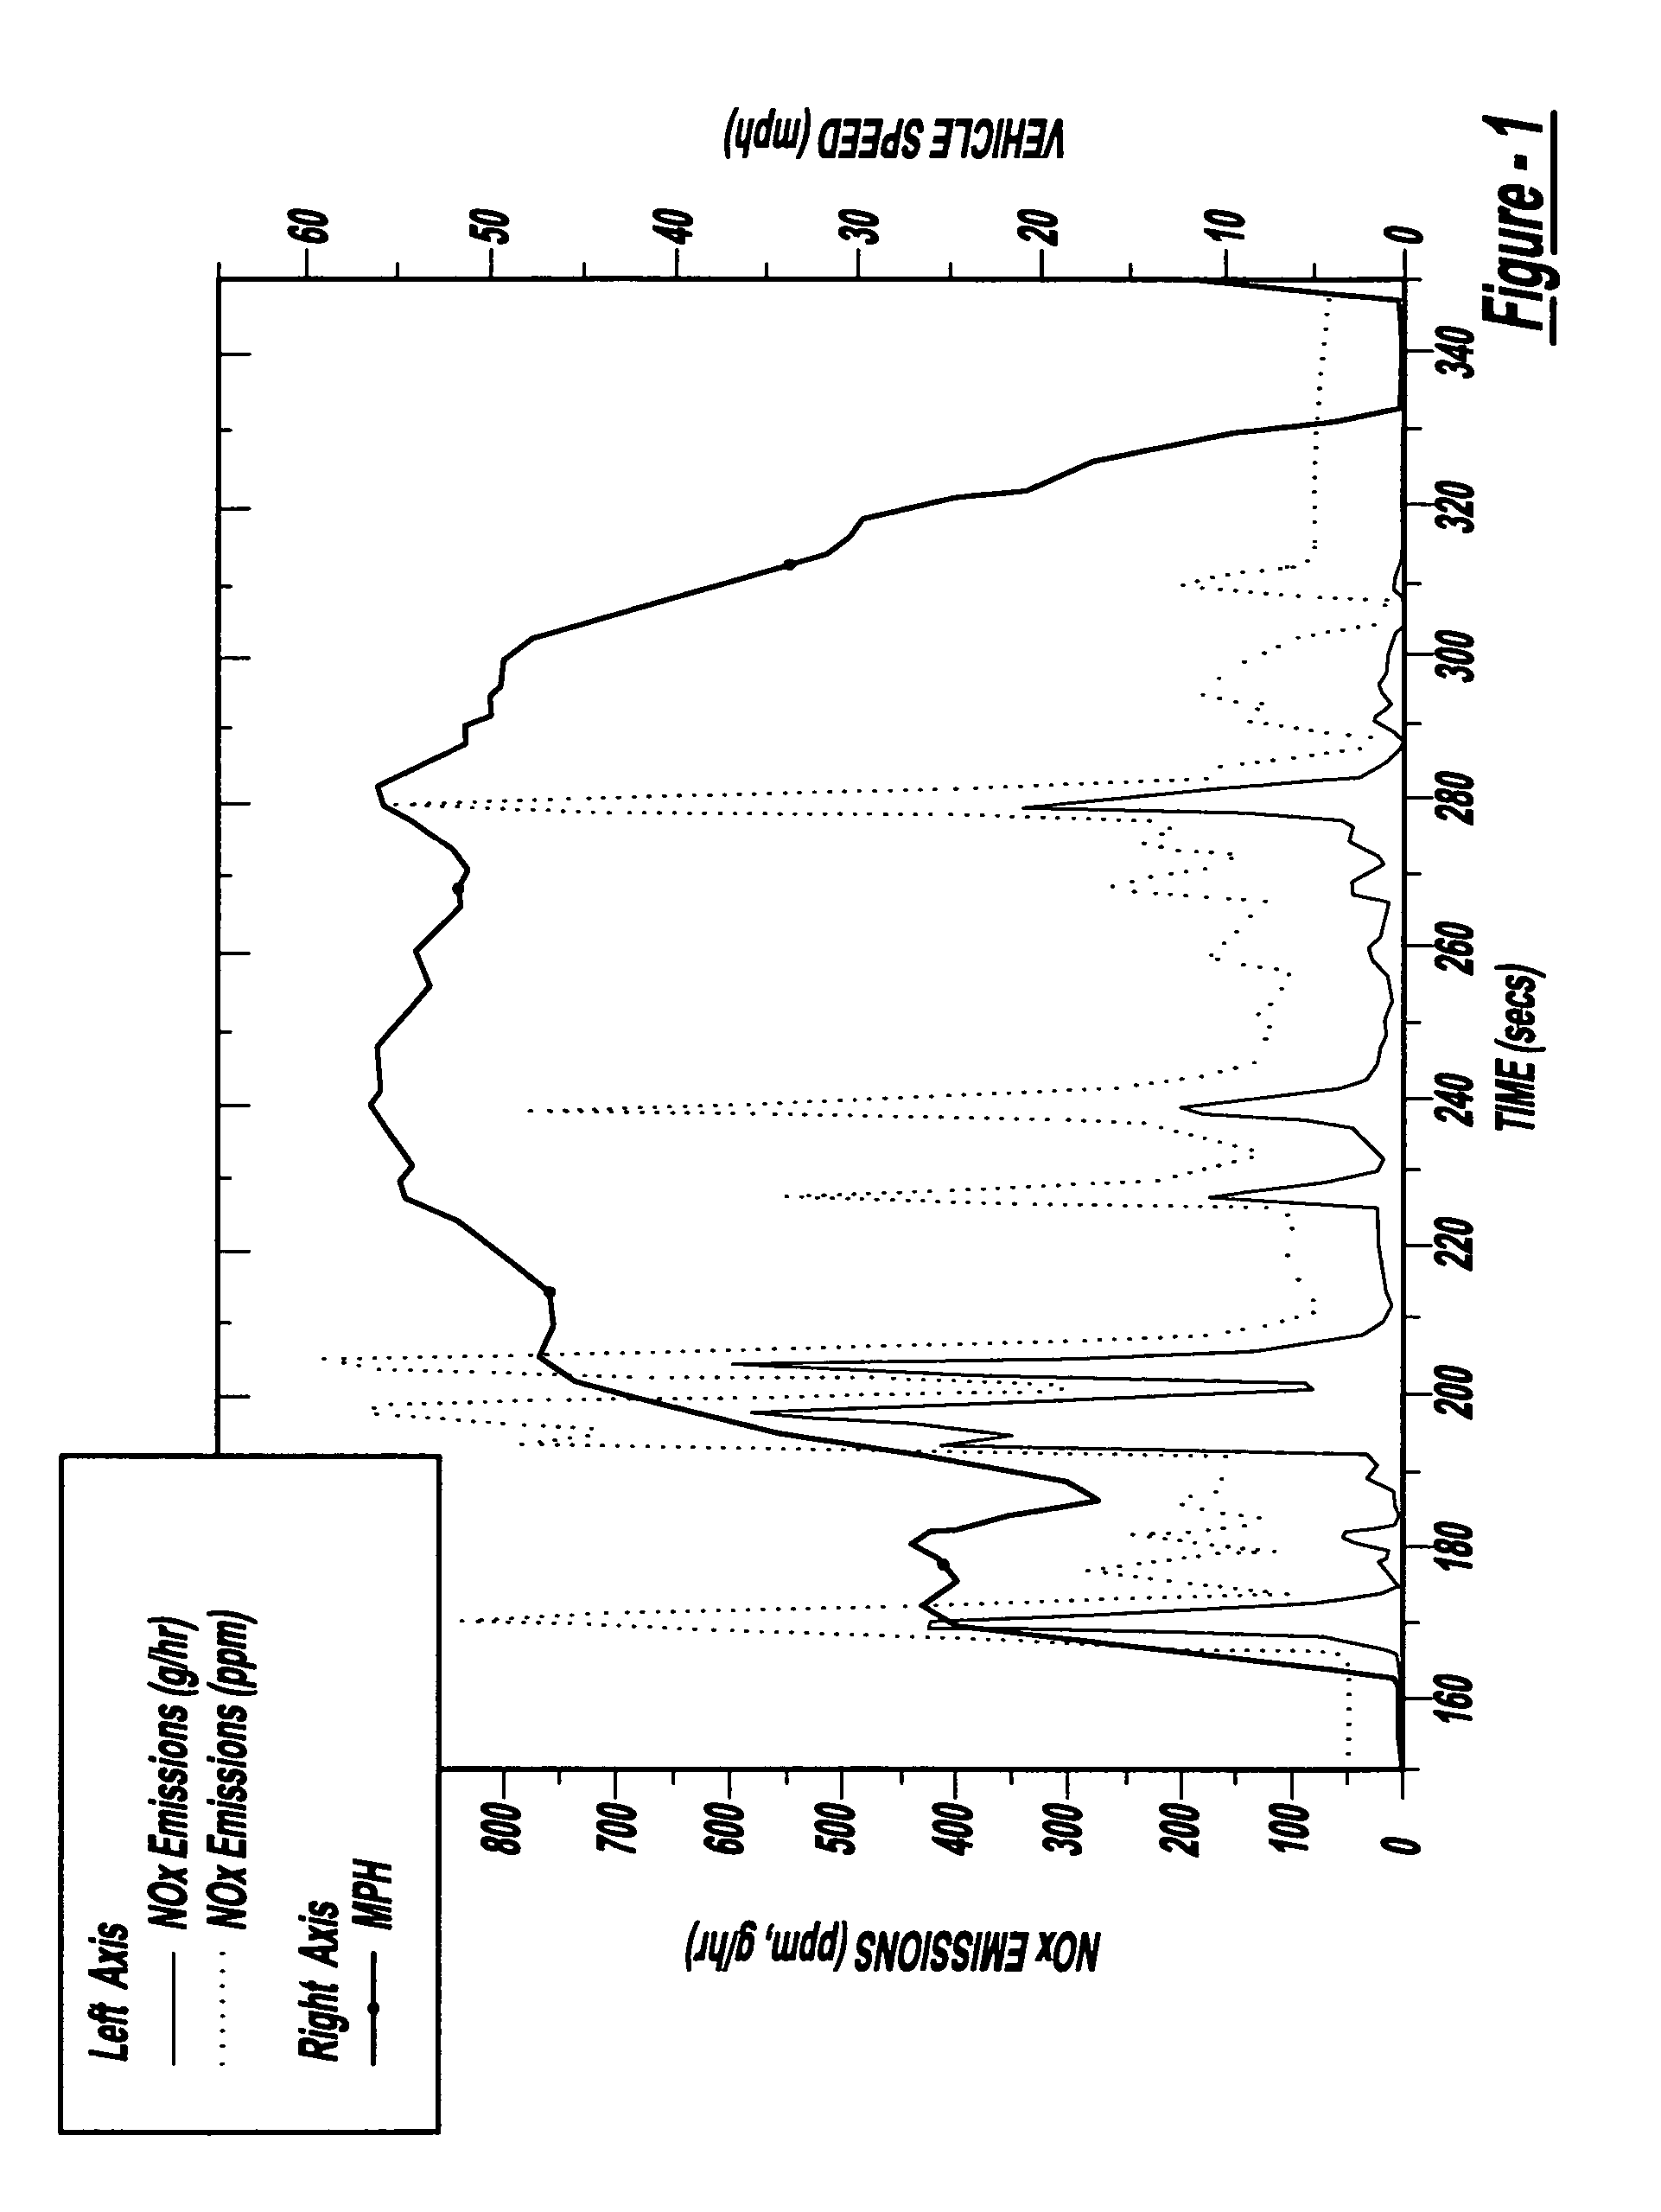 System and method for reducing NOx emissions during transient conditions in a diesel fueled vehicle with EGR